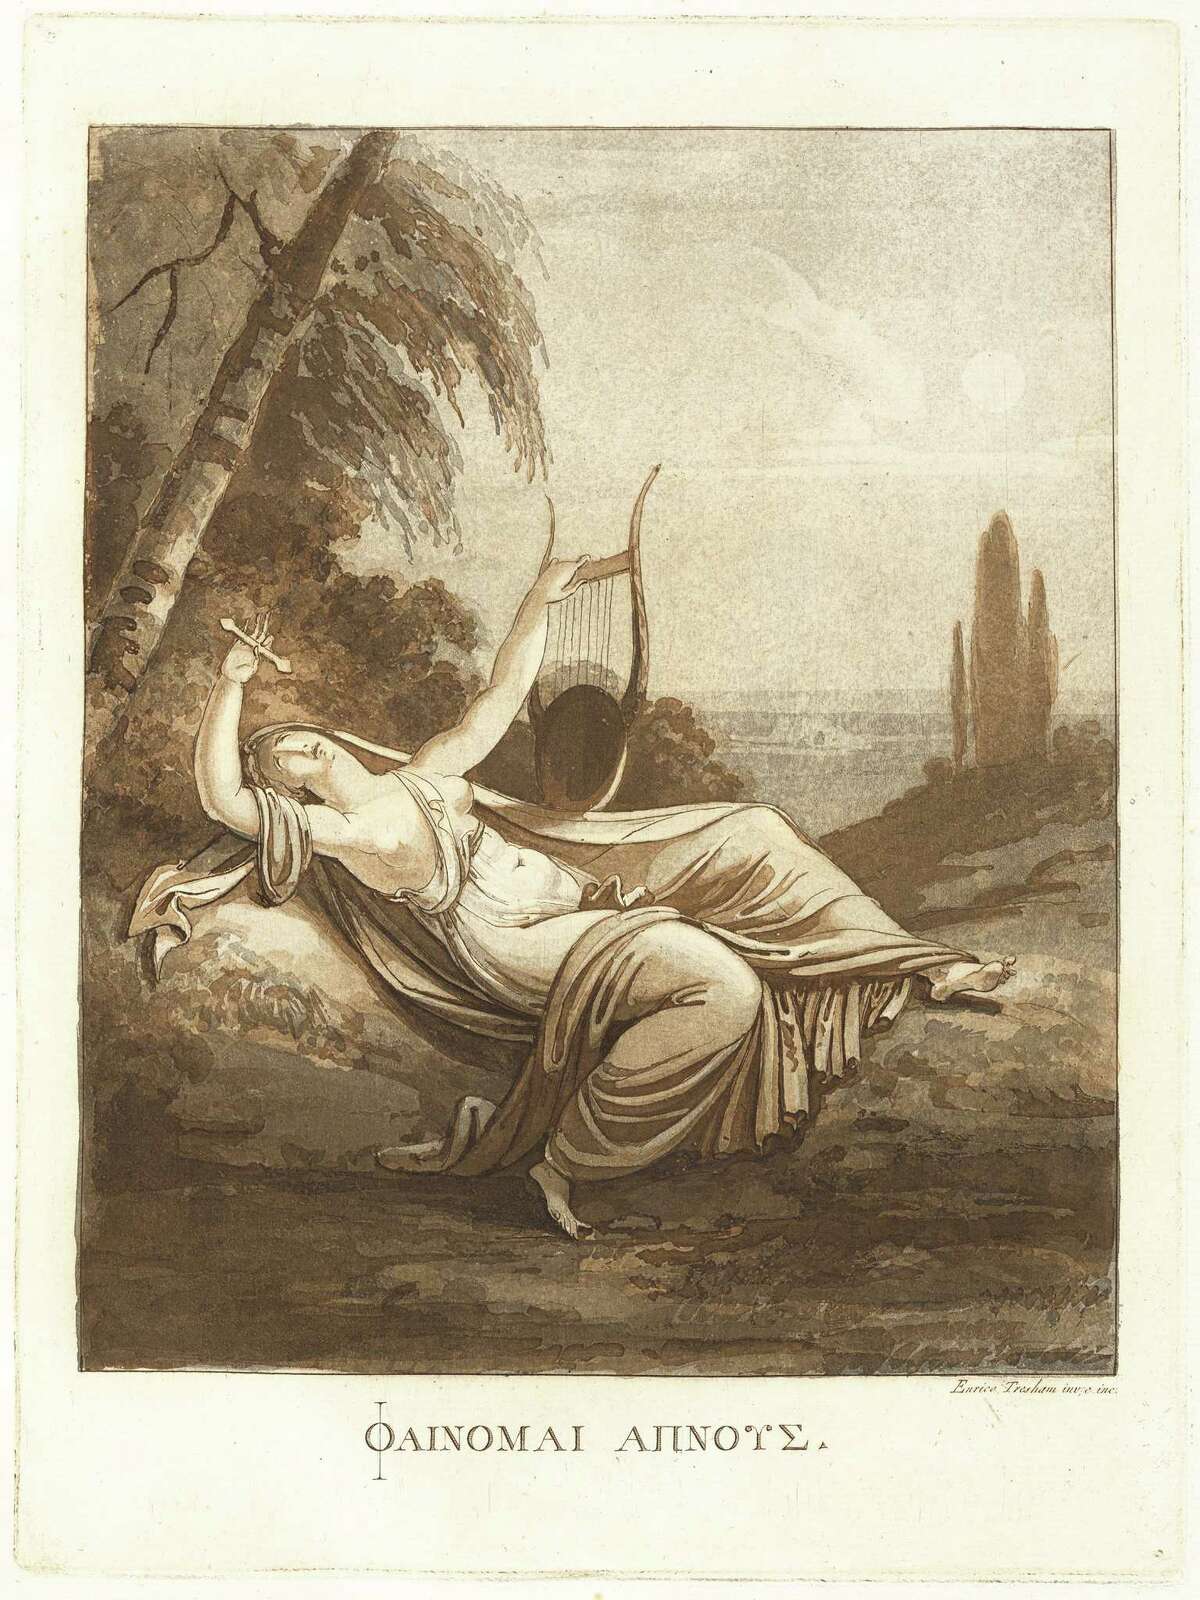 "The 'Well' for Violators of State Law" (1797), from the series "I Pozzi e i Piombi di Venezia (The Wells and Leads of Venice)" by Giovanni De Pian, after Francesco Galimberti.